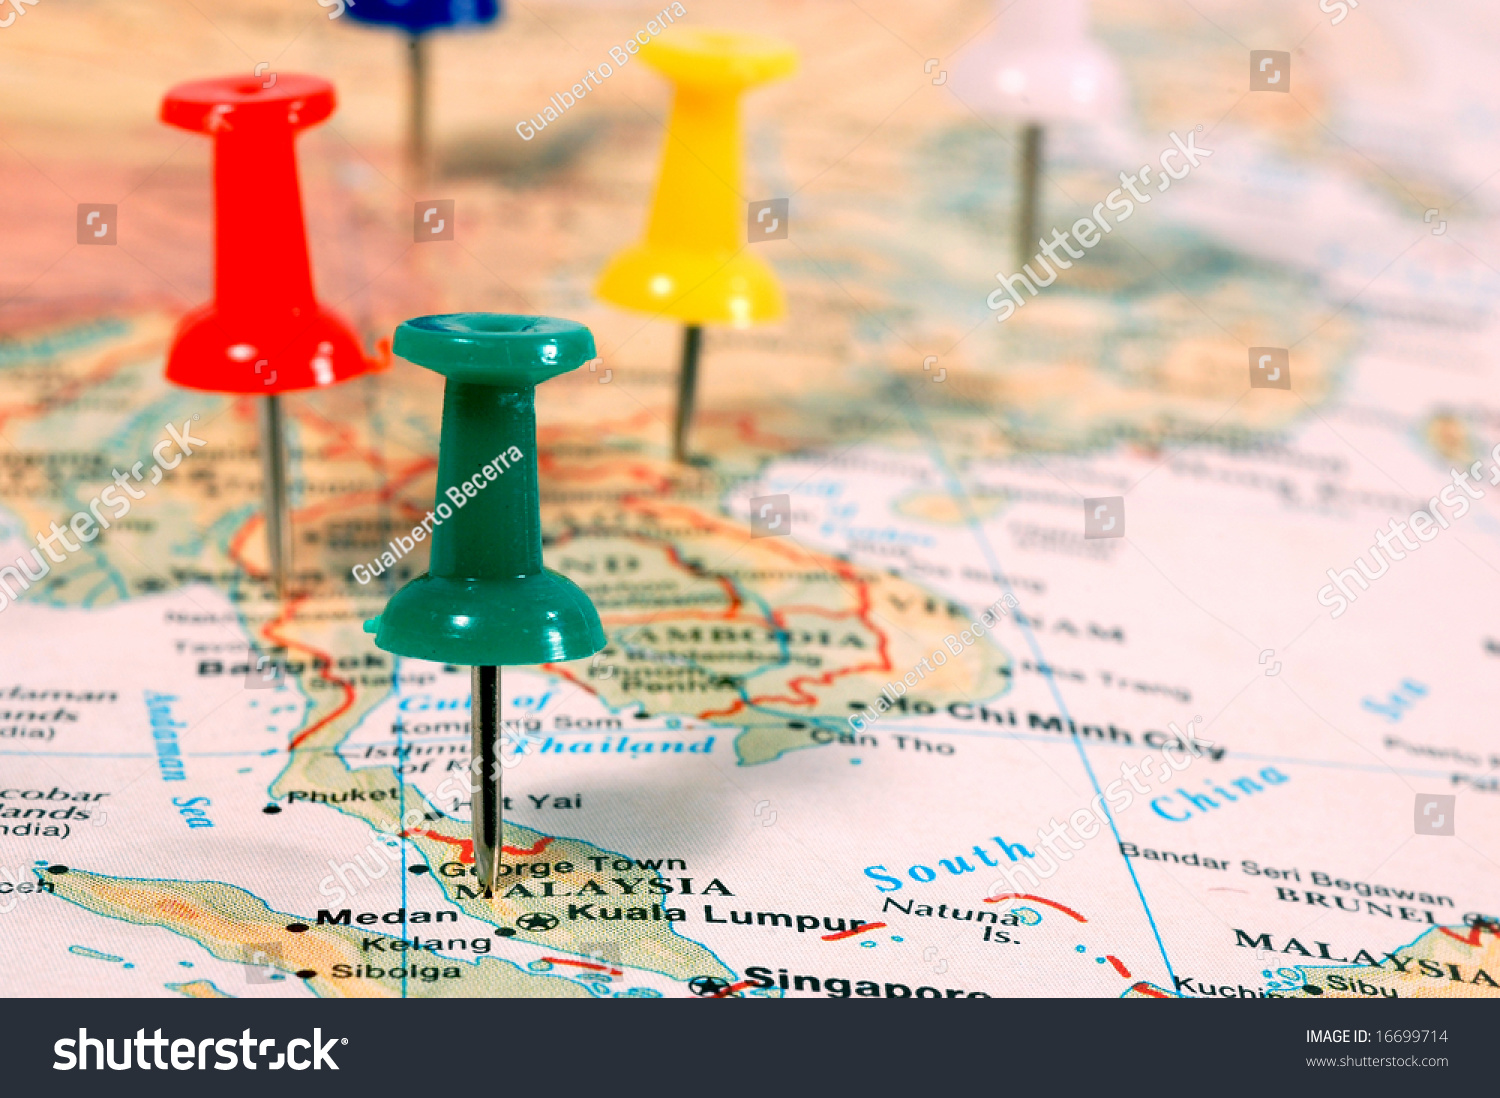 Map Of South East Asia With Pins Showing Cities Locations Stock Photo ...